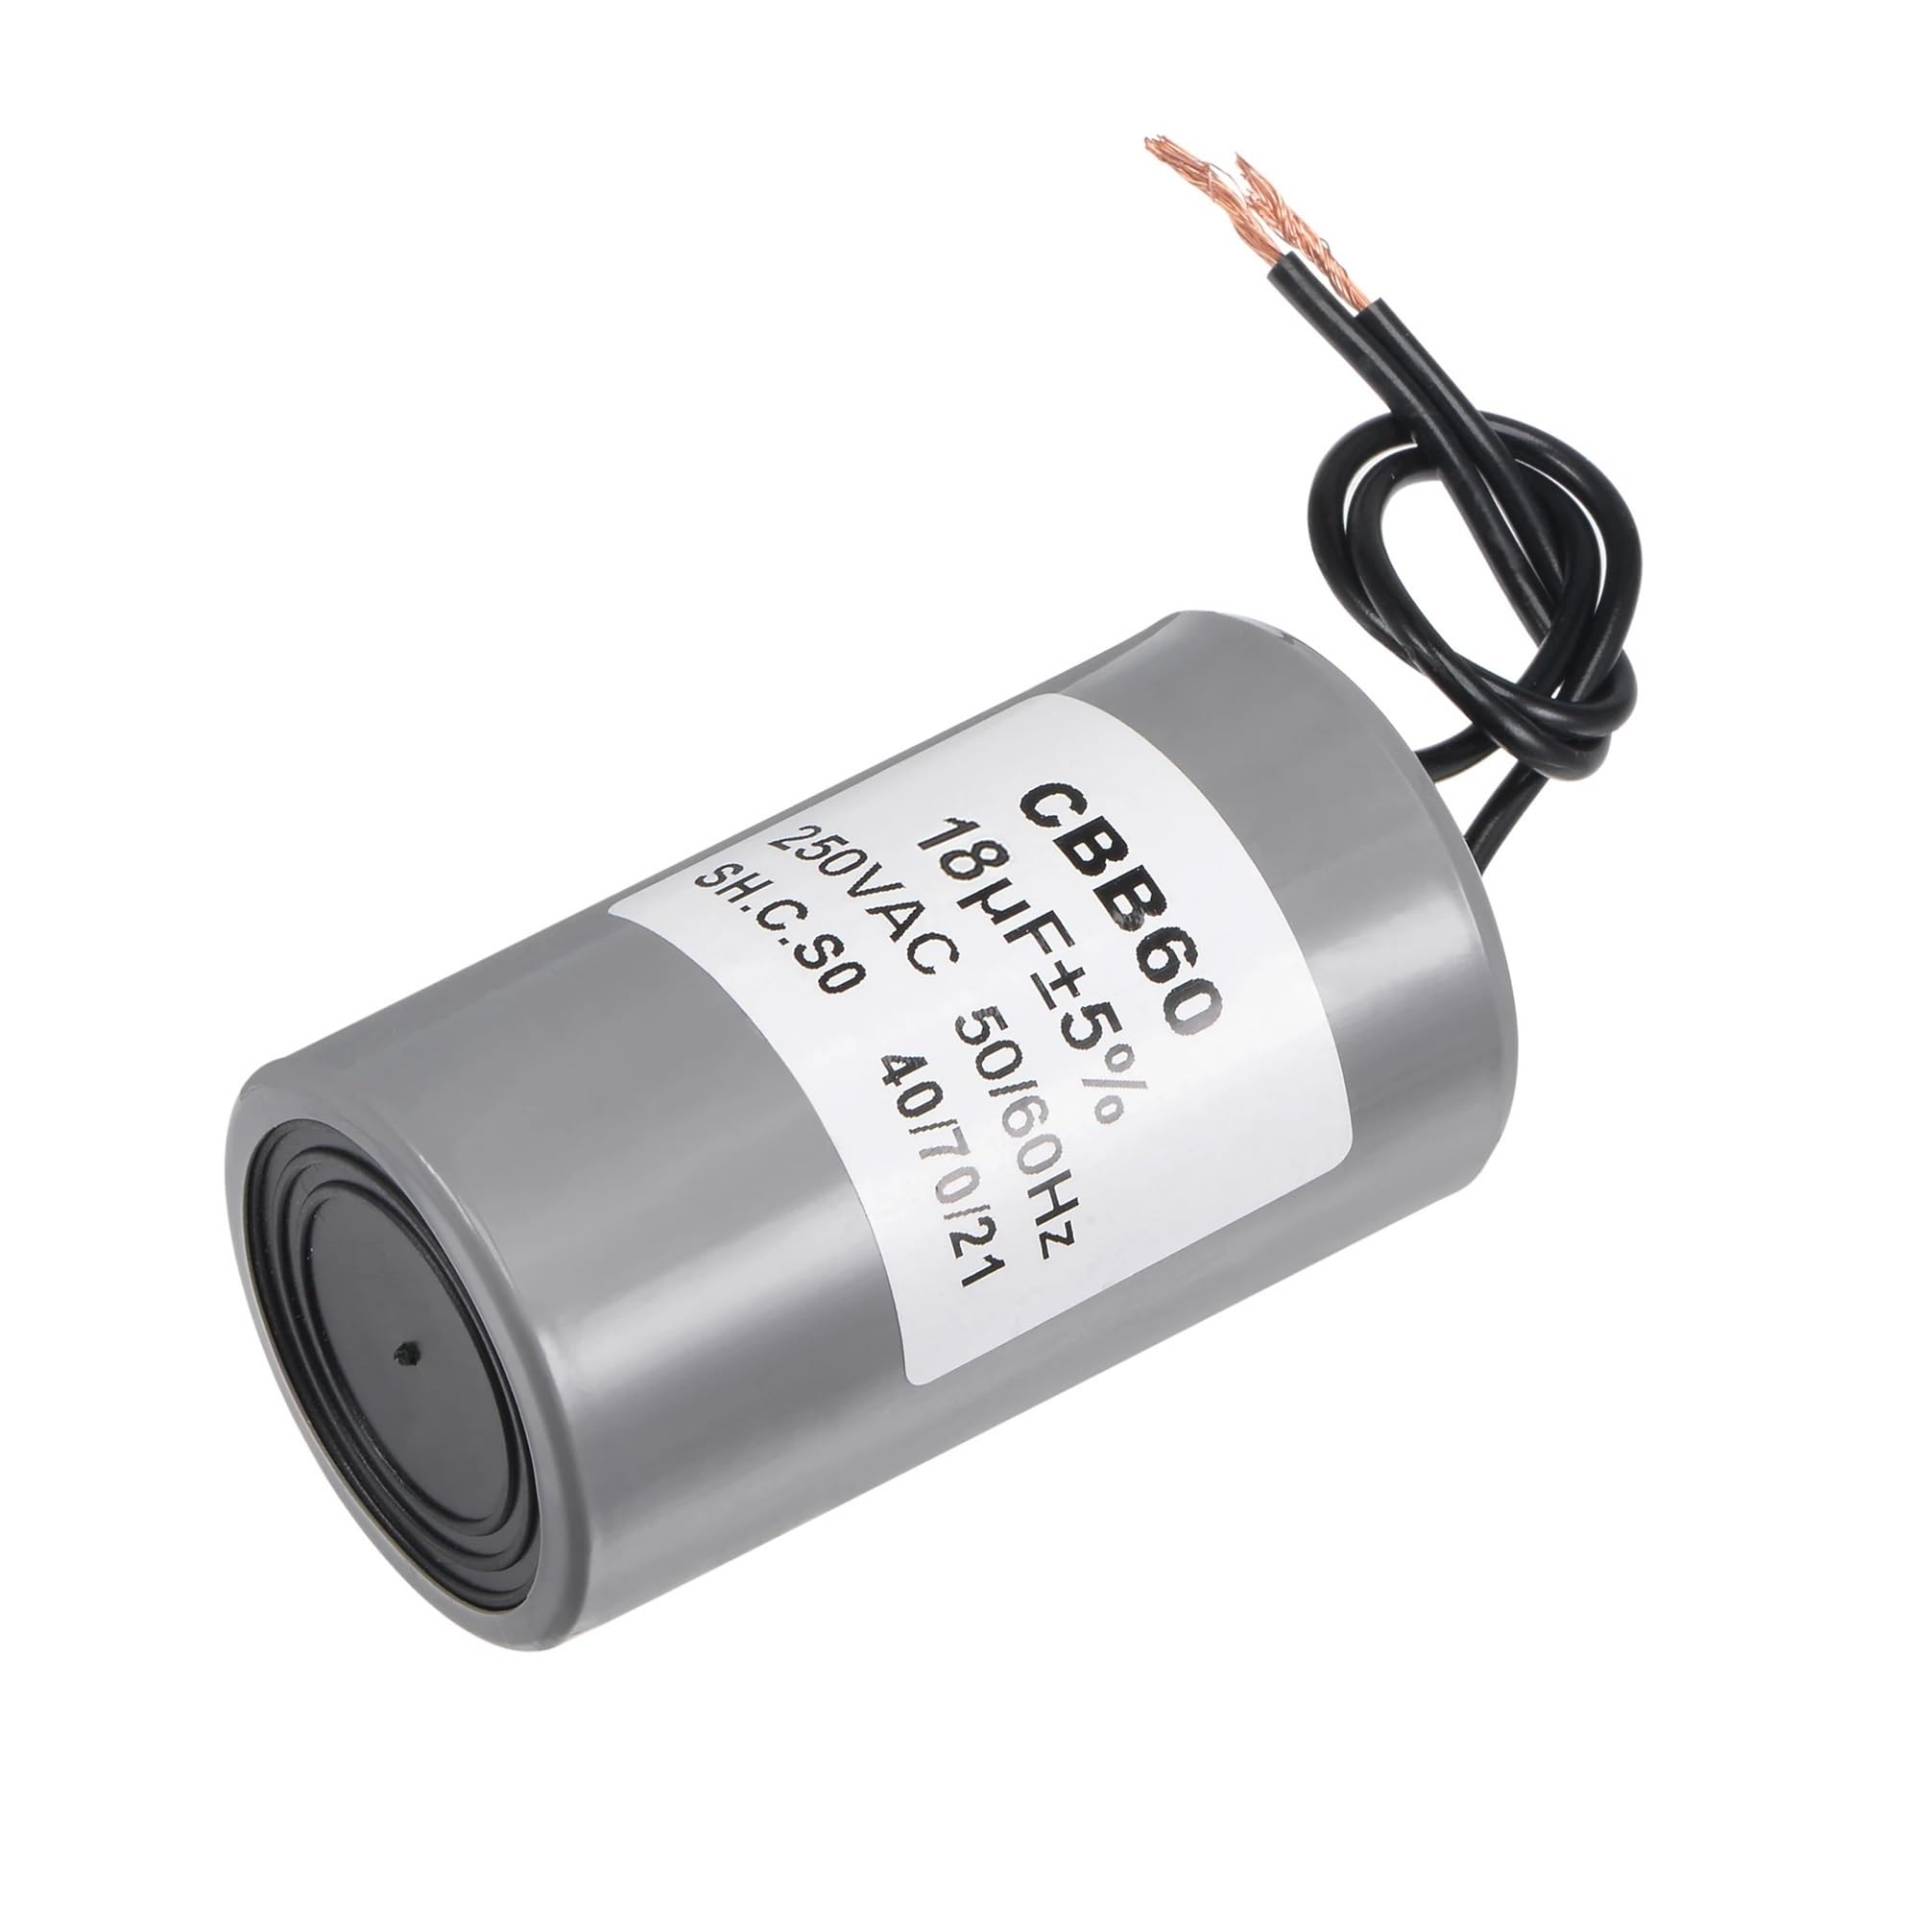 18uF CBB60 electronic starter Run Capacitor 250V AC 2 Wires 50/60Hz Cylinder 75x41mm for Air Compressor Water Pump electronic starter AUOQKQUT von AUOQKQUT